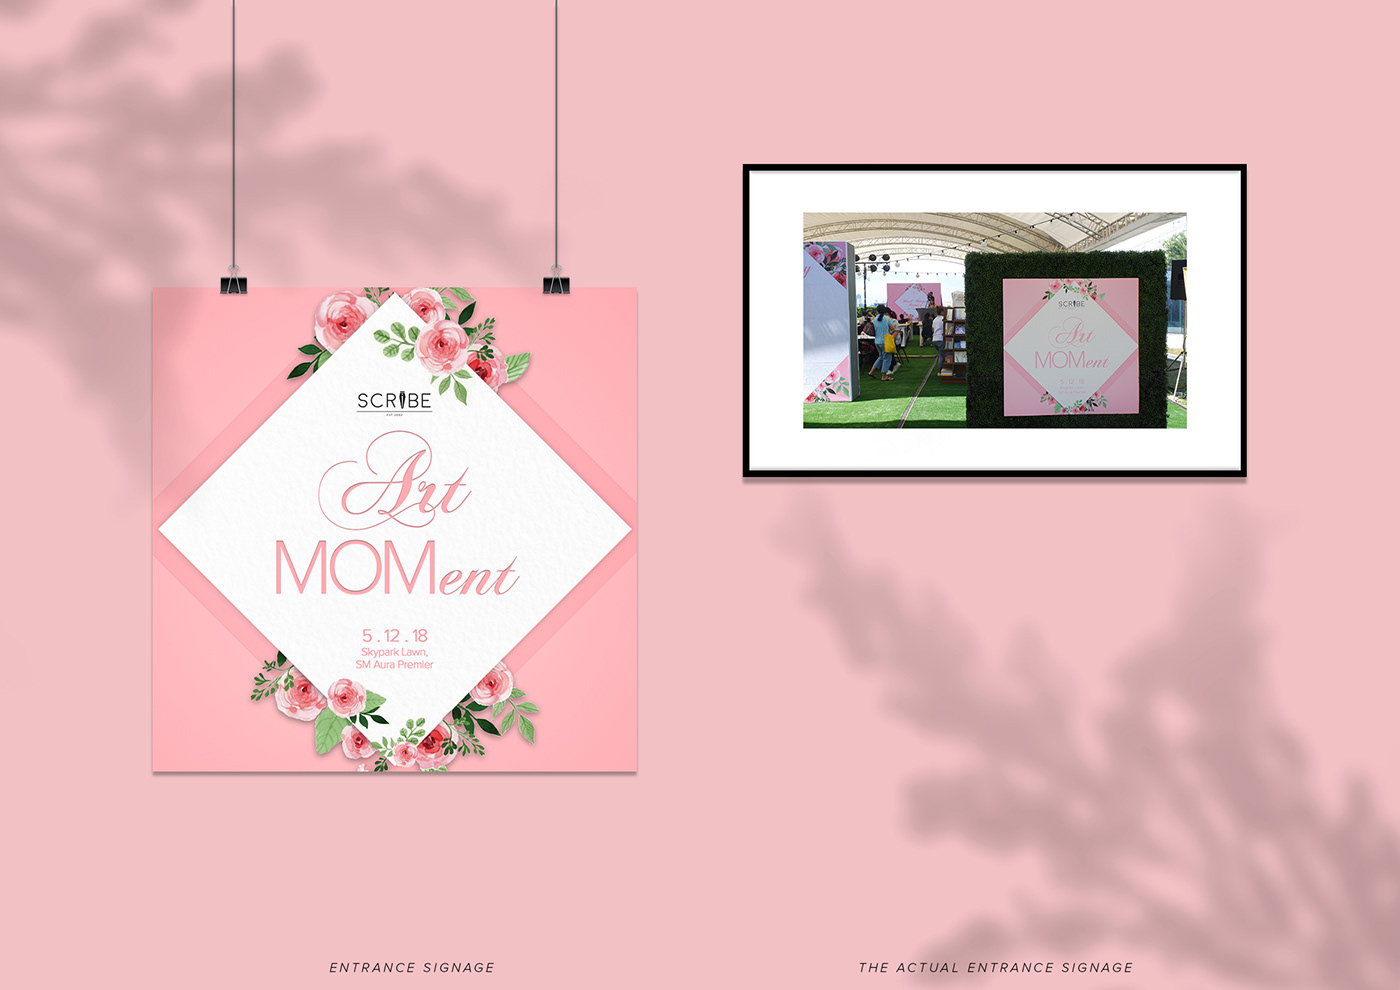 aesthetic clean layout Event Theme minimalist Mockup Mother's Day mother's day theme Poster Design promo poster Marketing collateral